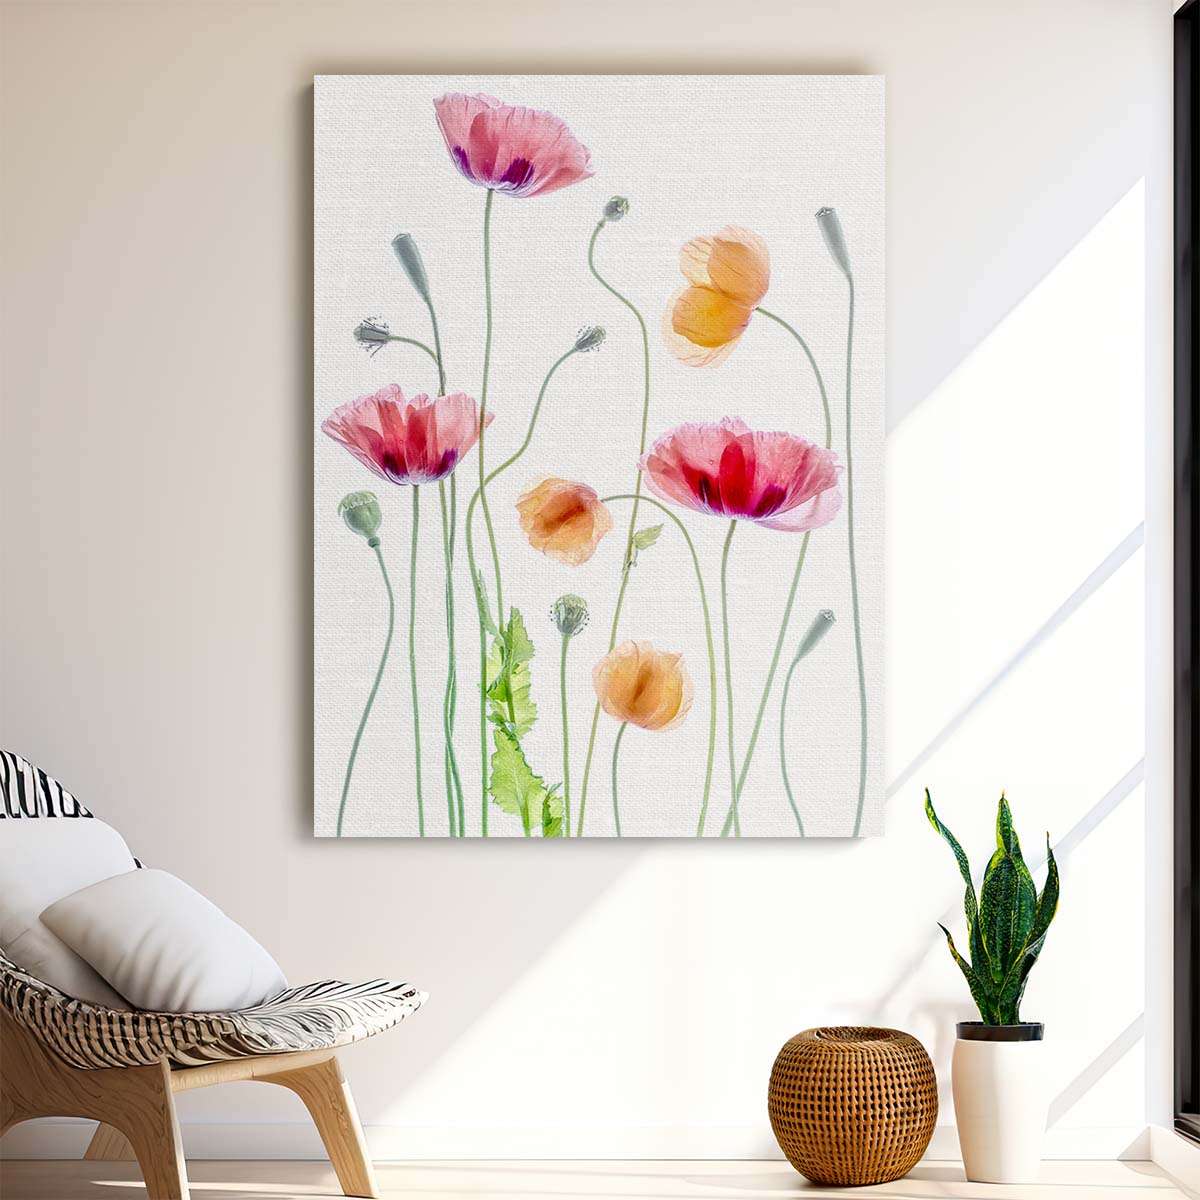 Colorful Summer Poppies Macro Photography by Mandy Disher by Luxuriance Designs, made in USA